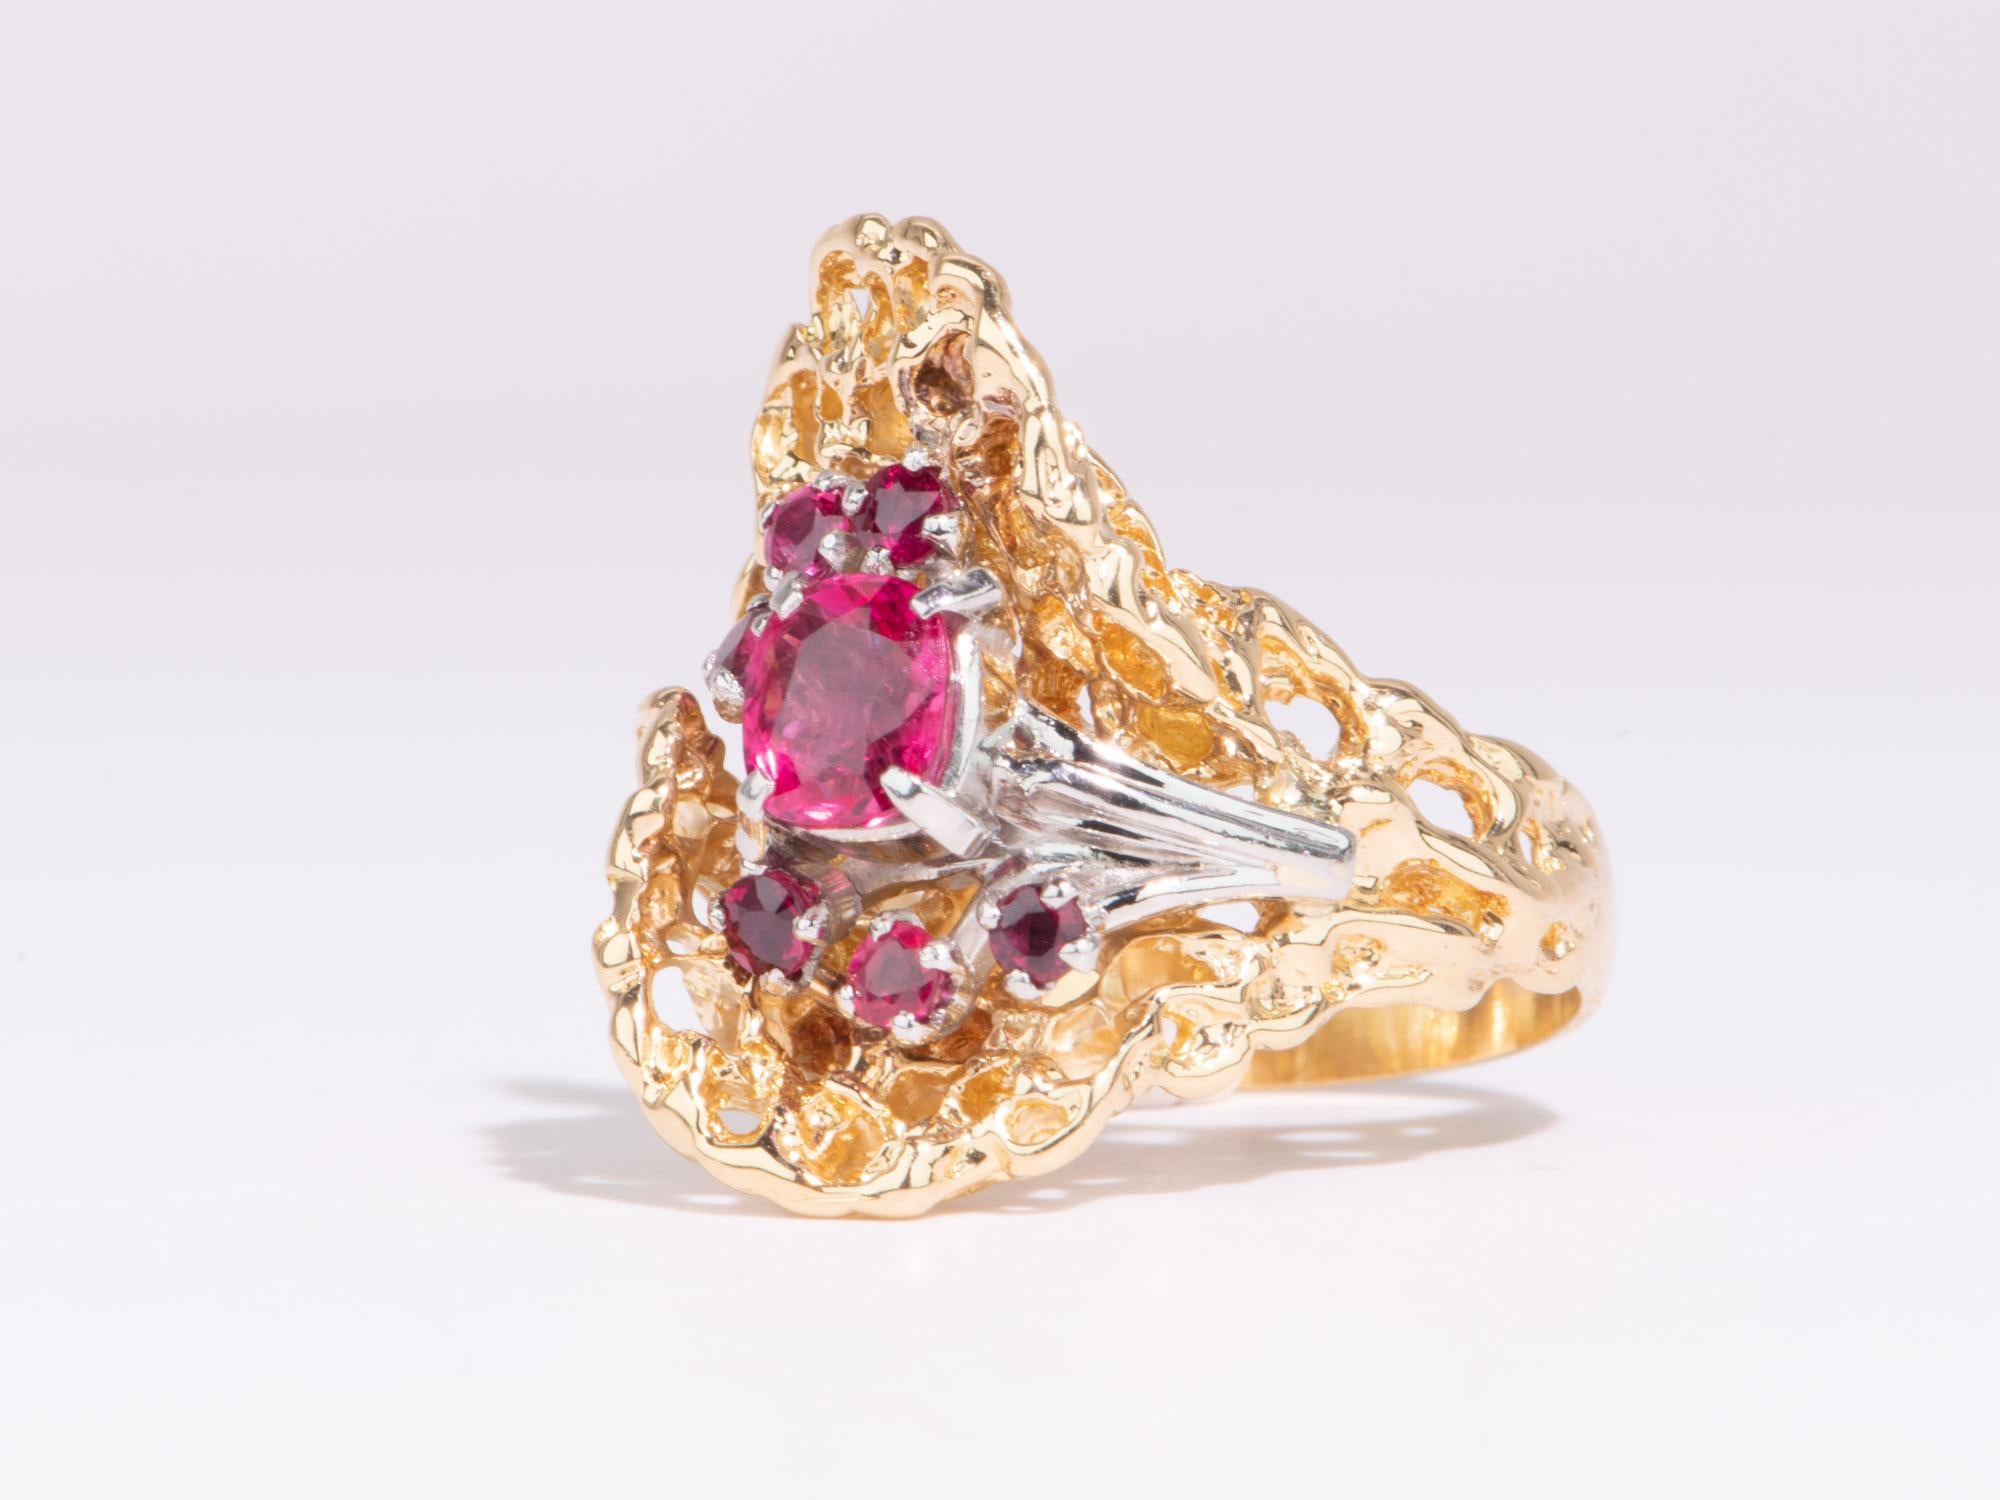 Organic Modernist Style Statement Ring with Tourmaline Clusters 18K Gold V1106 In New Condition For Sale In Osprey, FL